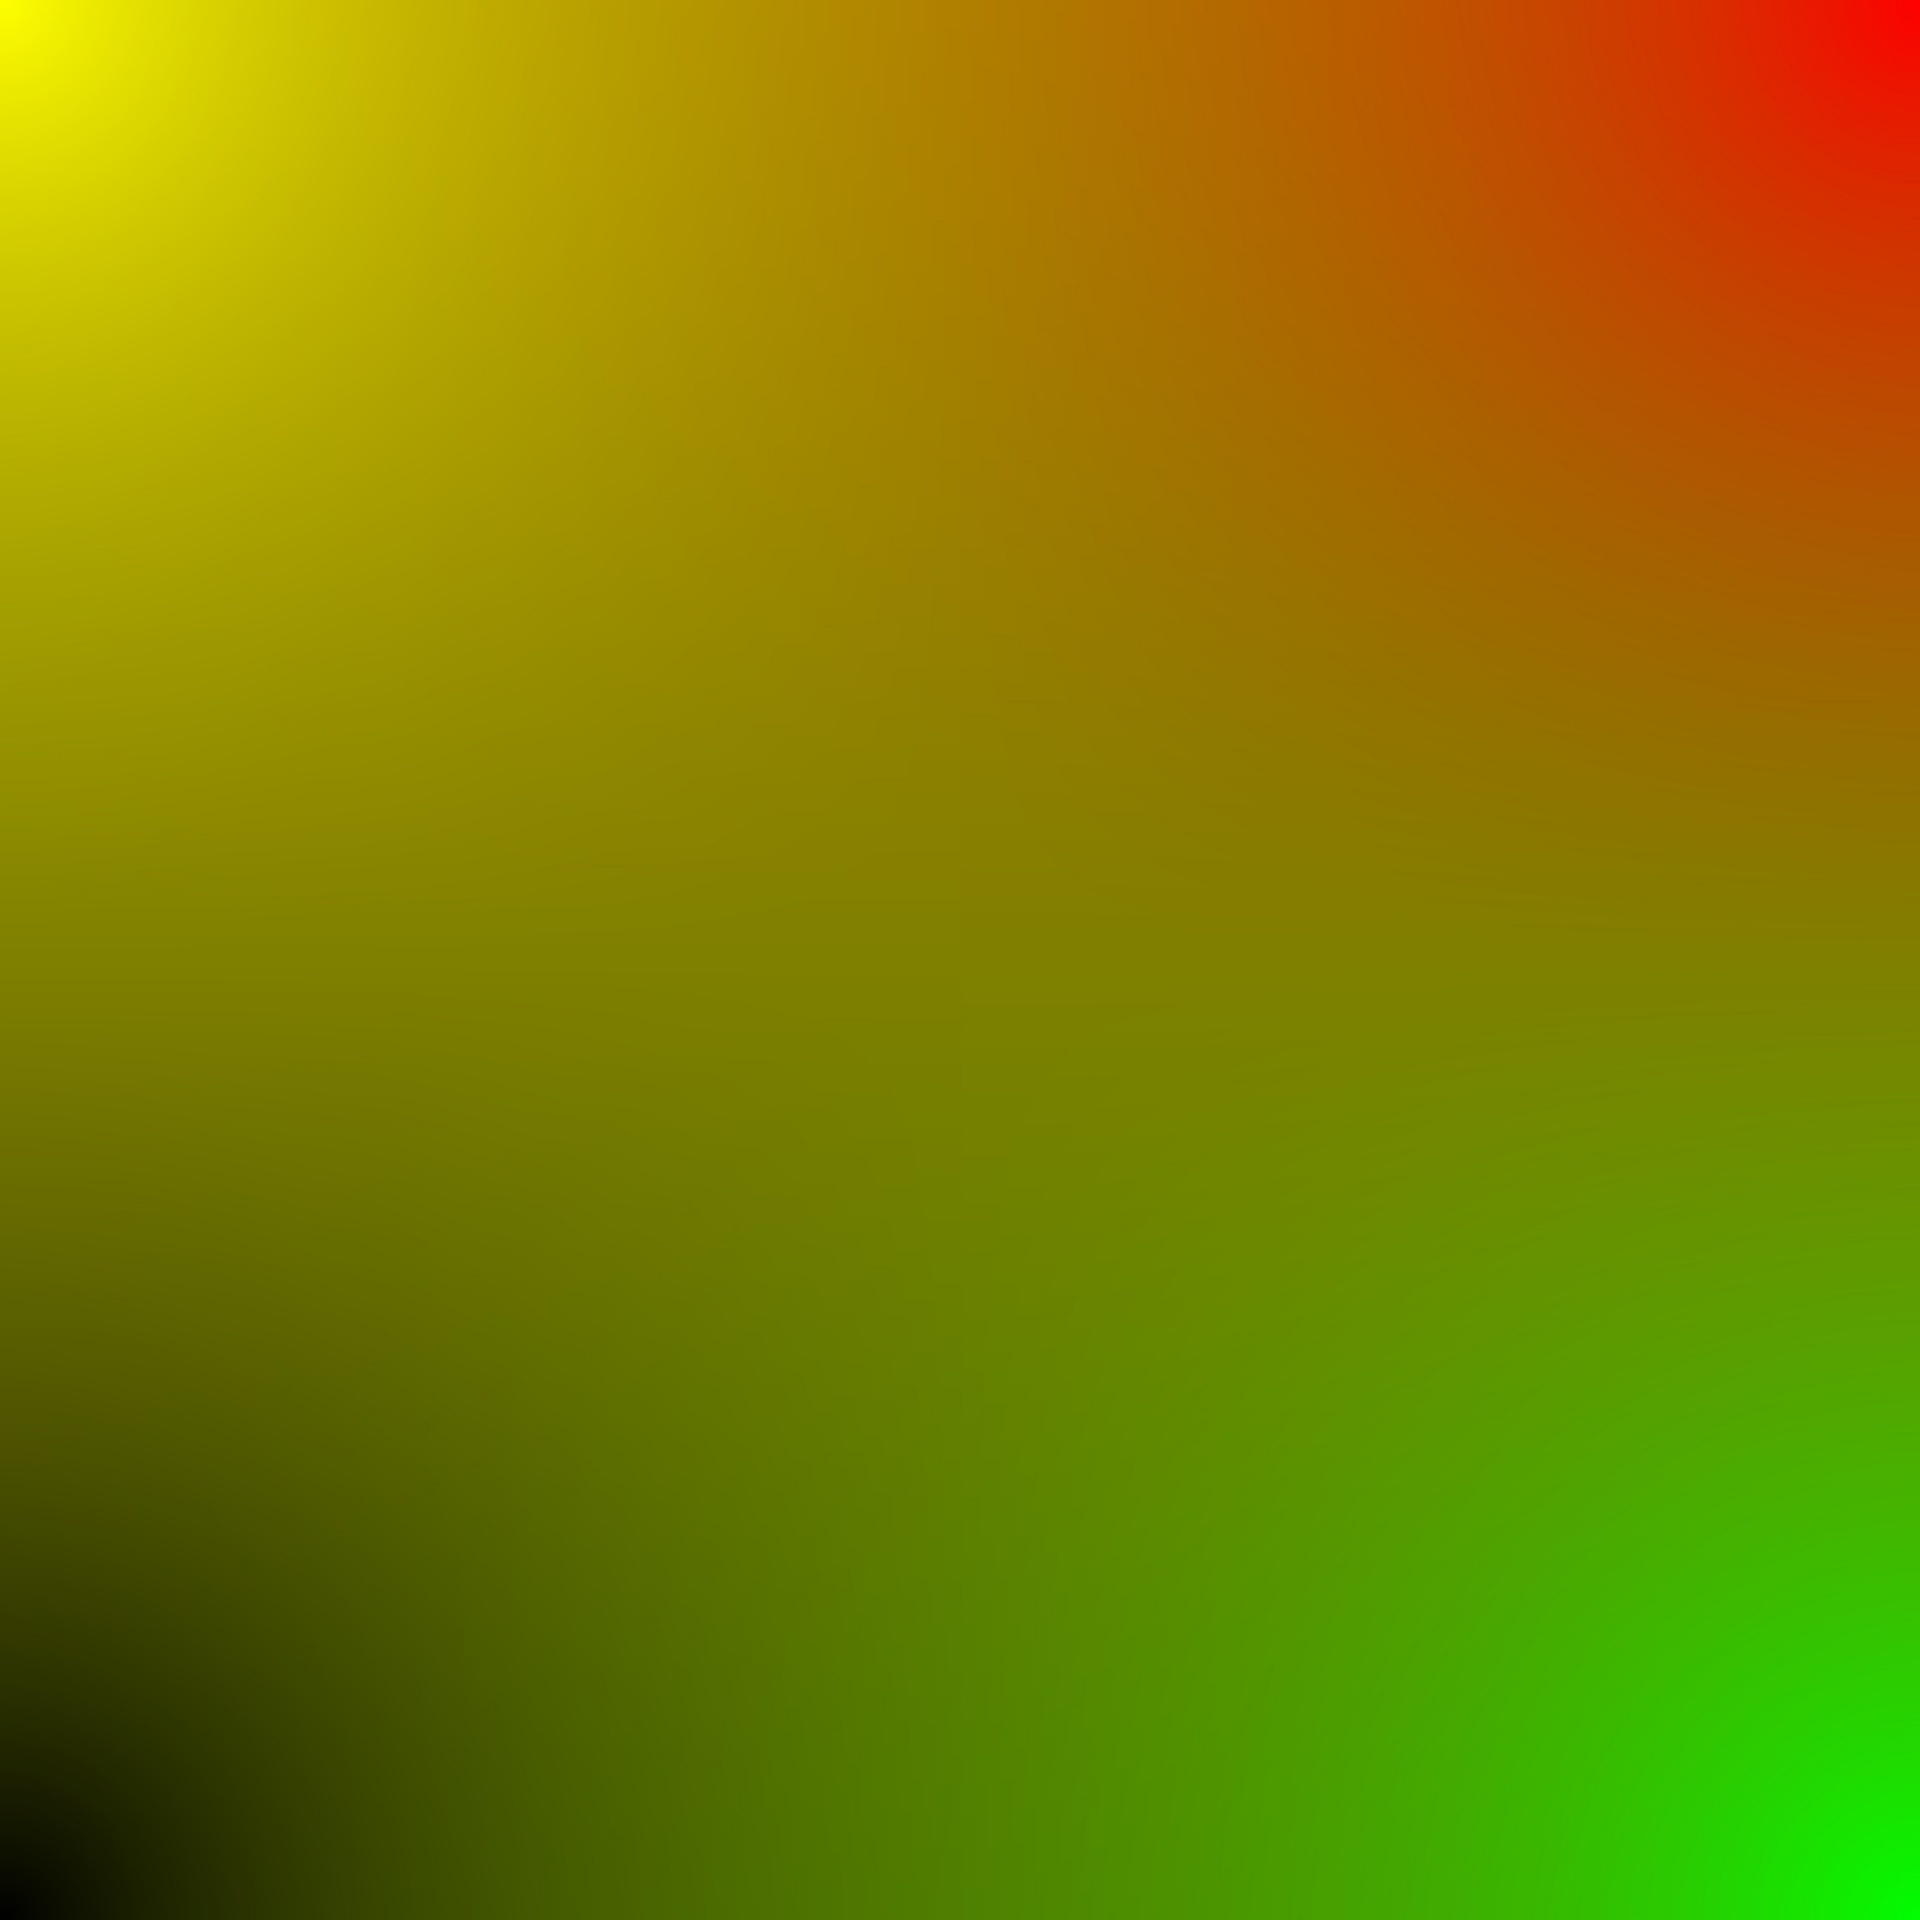 Gradient,yellow,green,red,black - free image from 